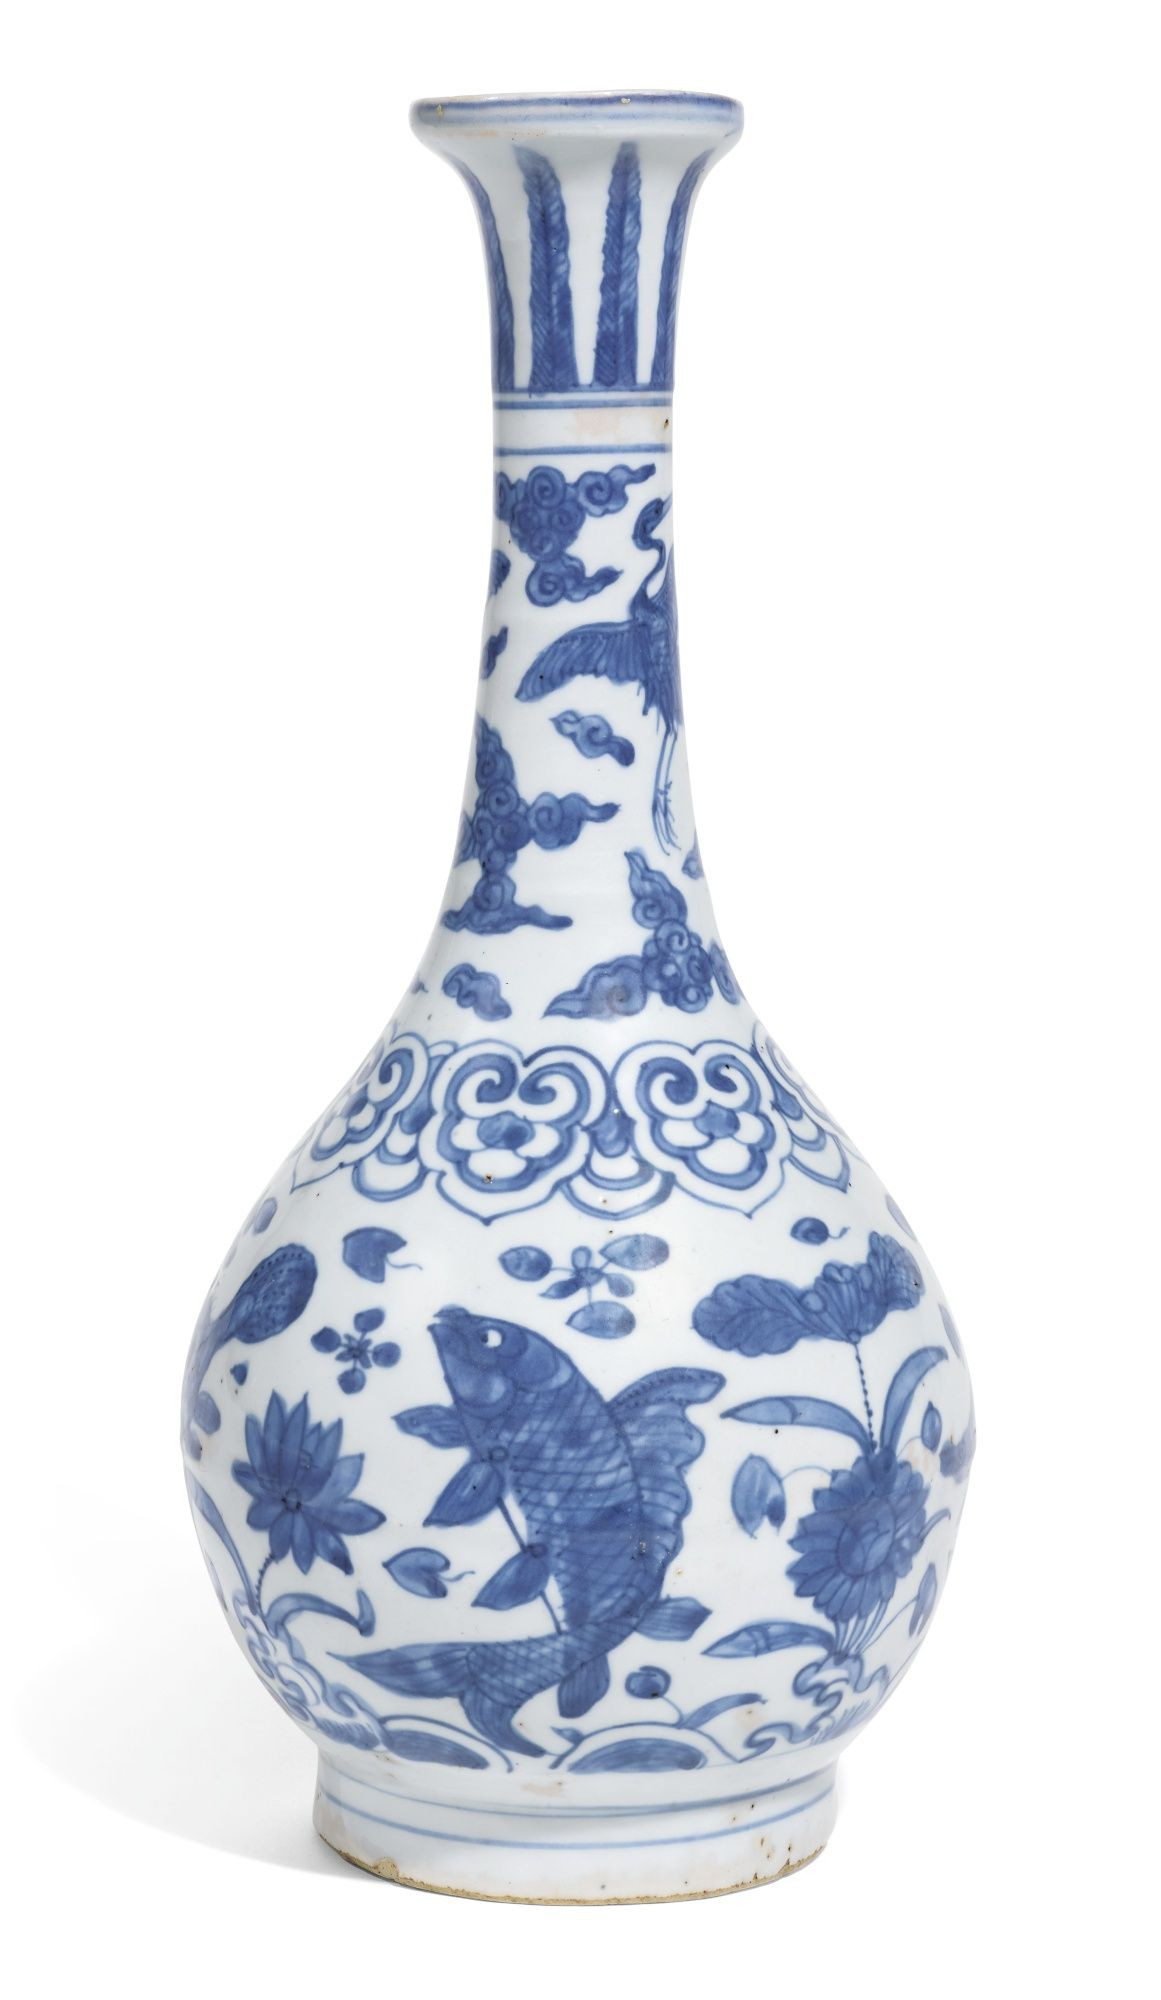 13 Awesome Chinese Pottery Vase 2024 free download chinese pottery vase of a blue and white bottle vase ming dynasty jiajing wanli period for vase a chinese blue and white porcelain